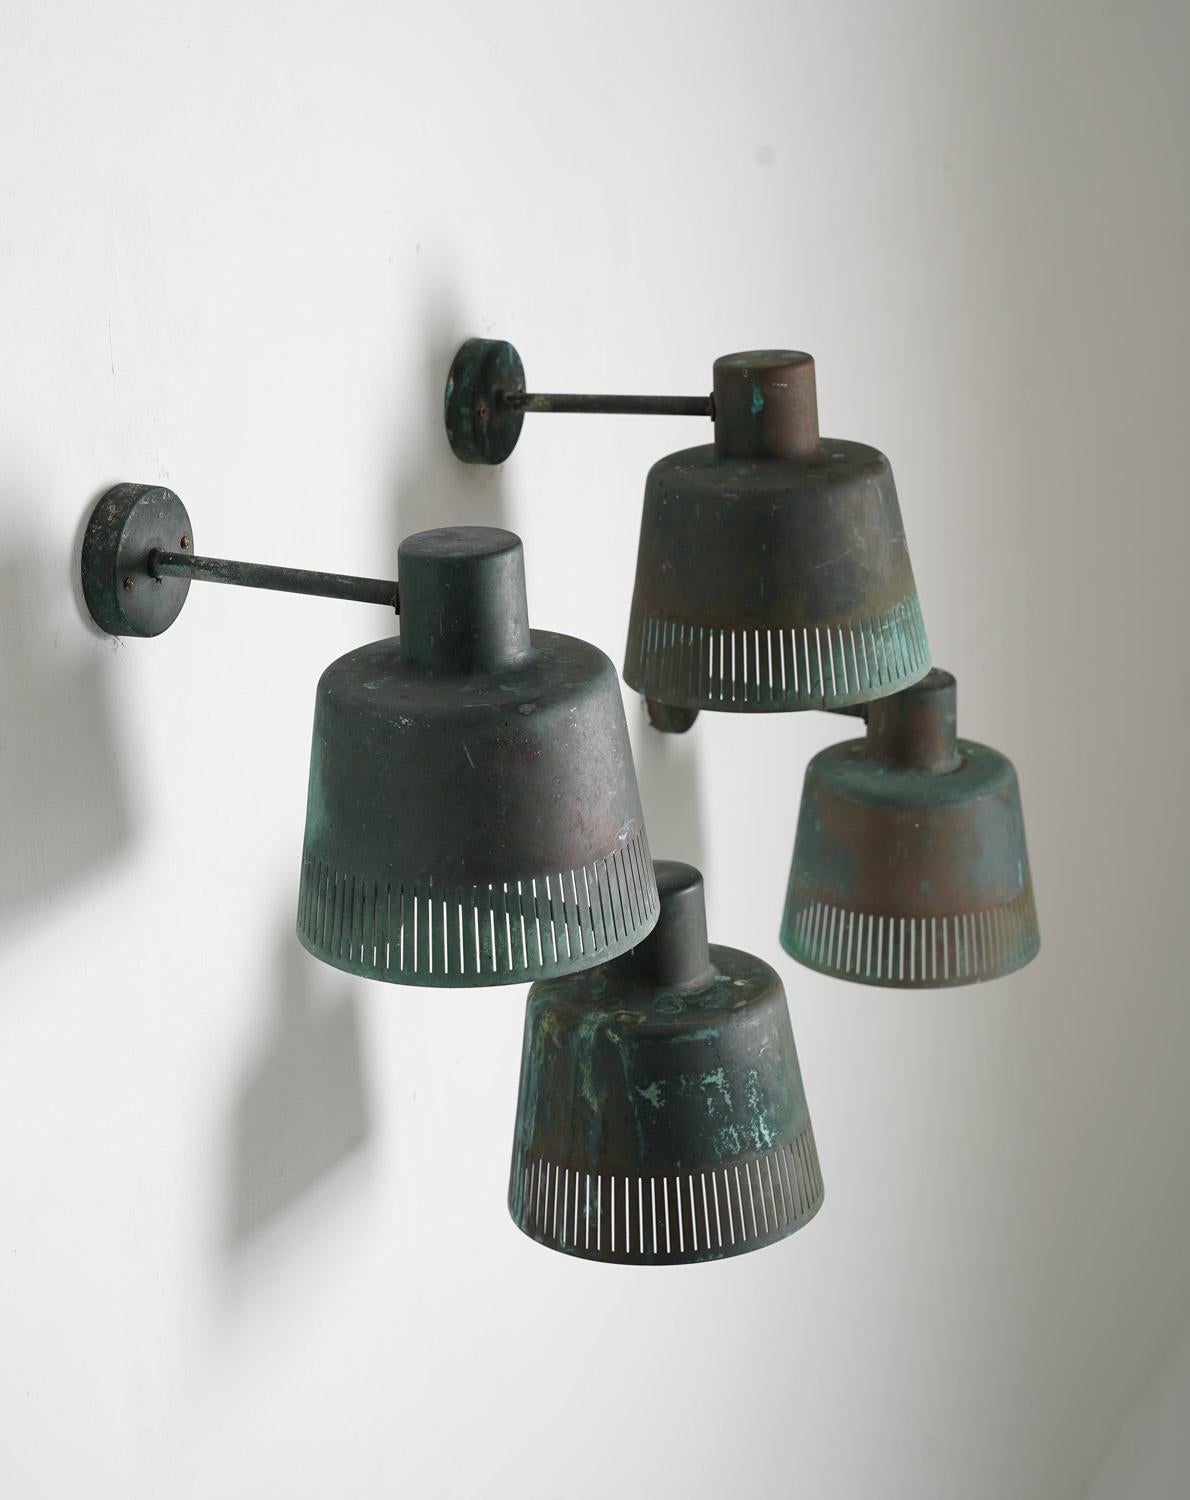 Rare outdoor wall lamps by Hans Bergström for Ateljé Lyktan, 1960s.
These high-quality lamps are made of solid, beautifully patinated copper with a perforated pattern that looks amazing when lit.
Condition: Very good original condition with great